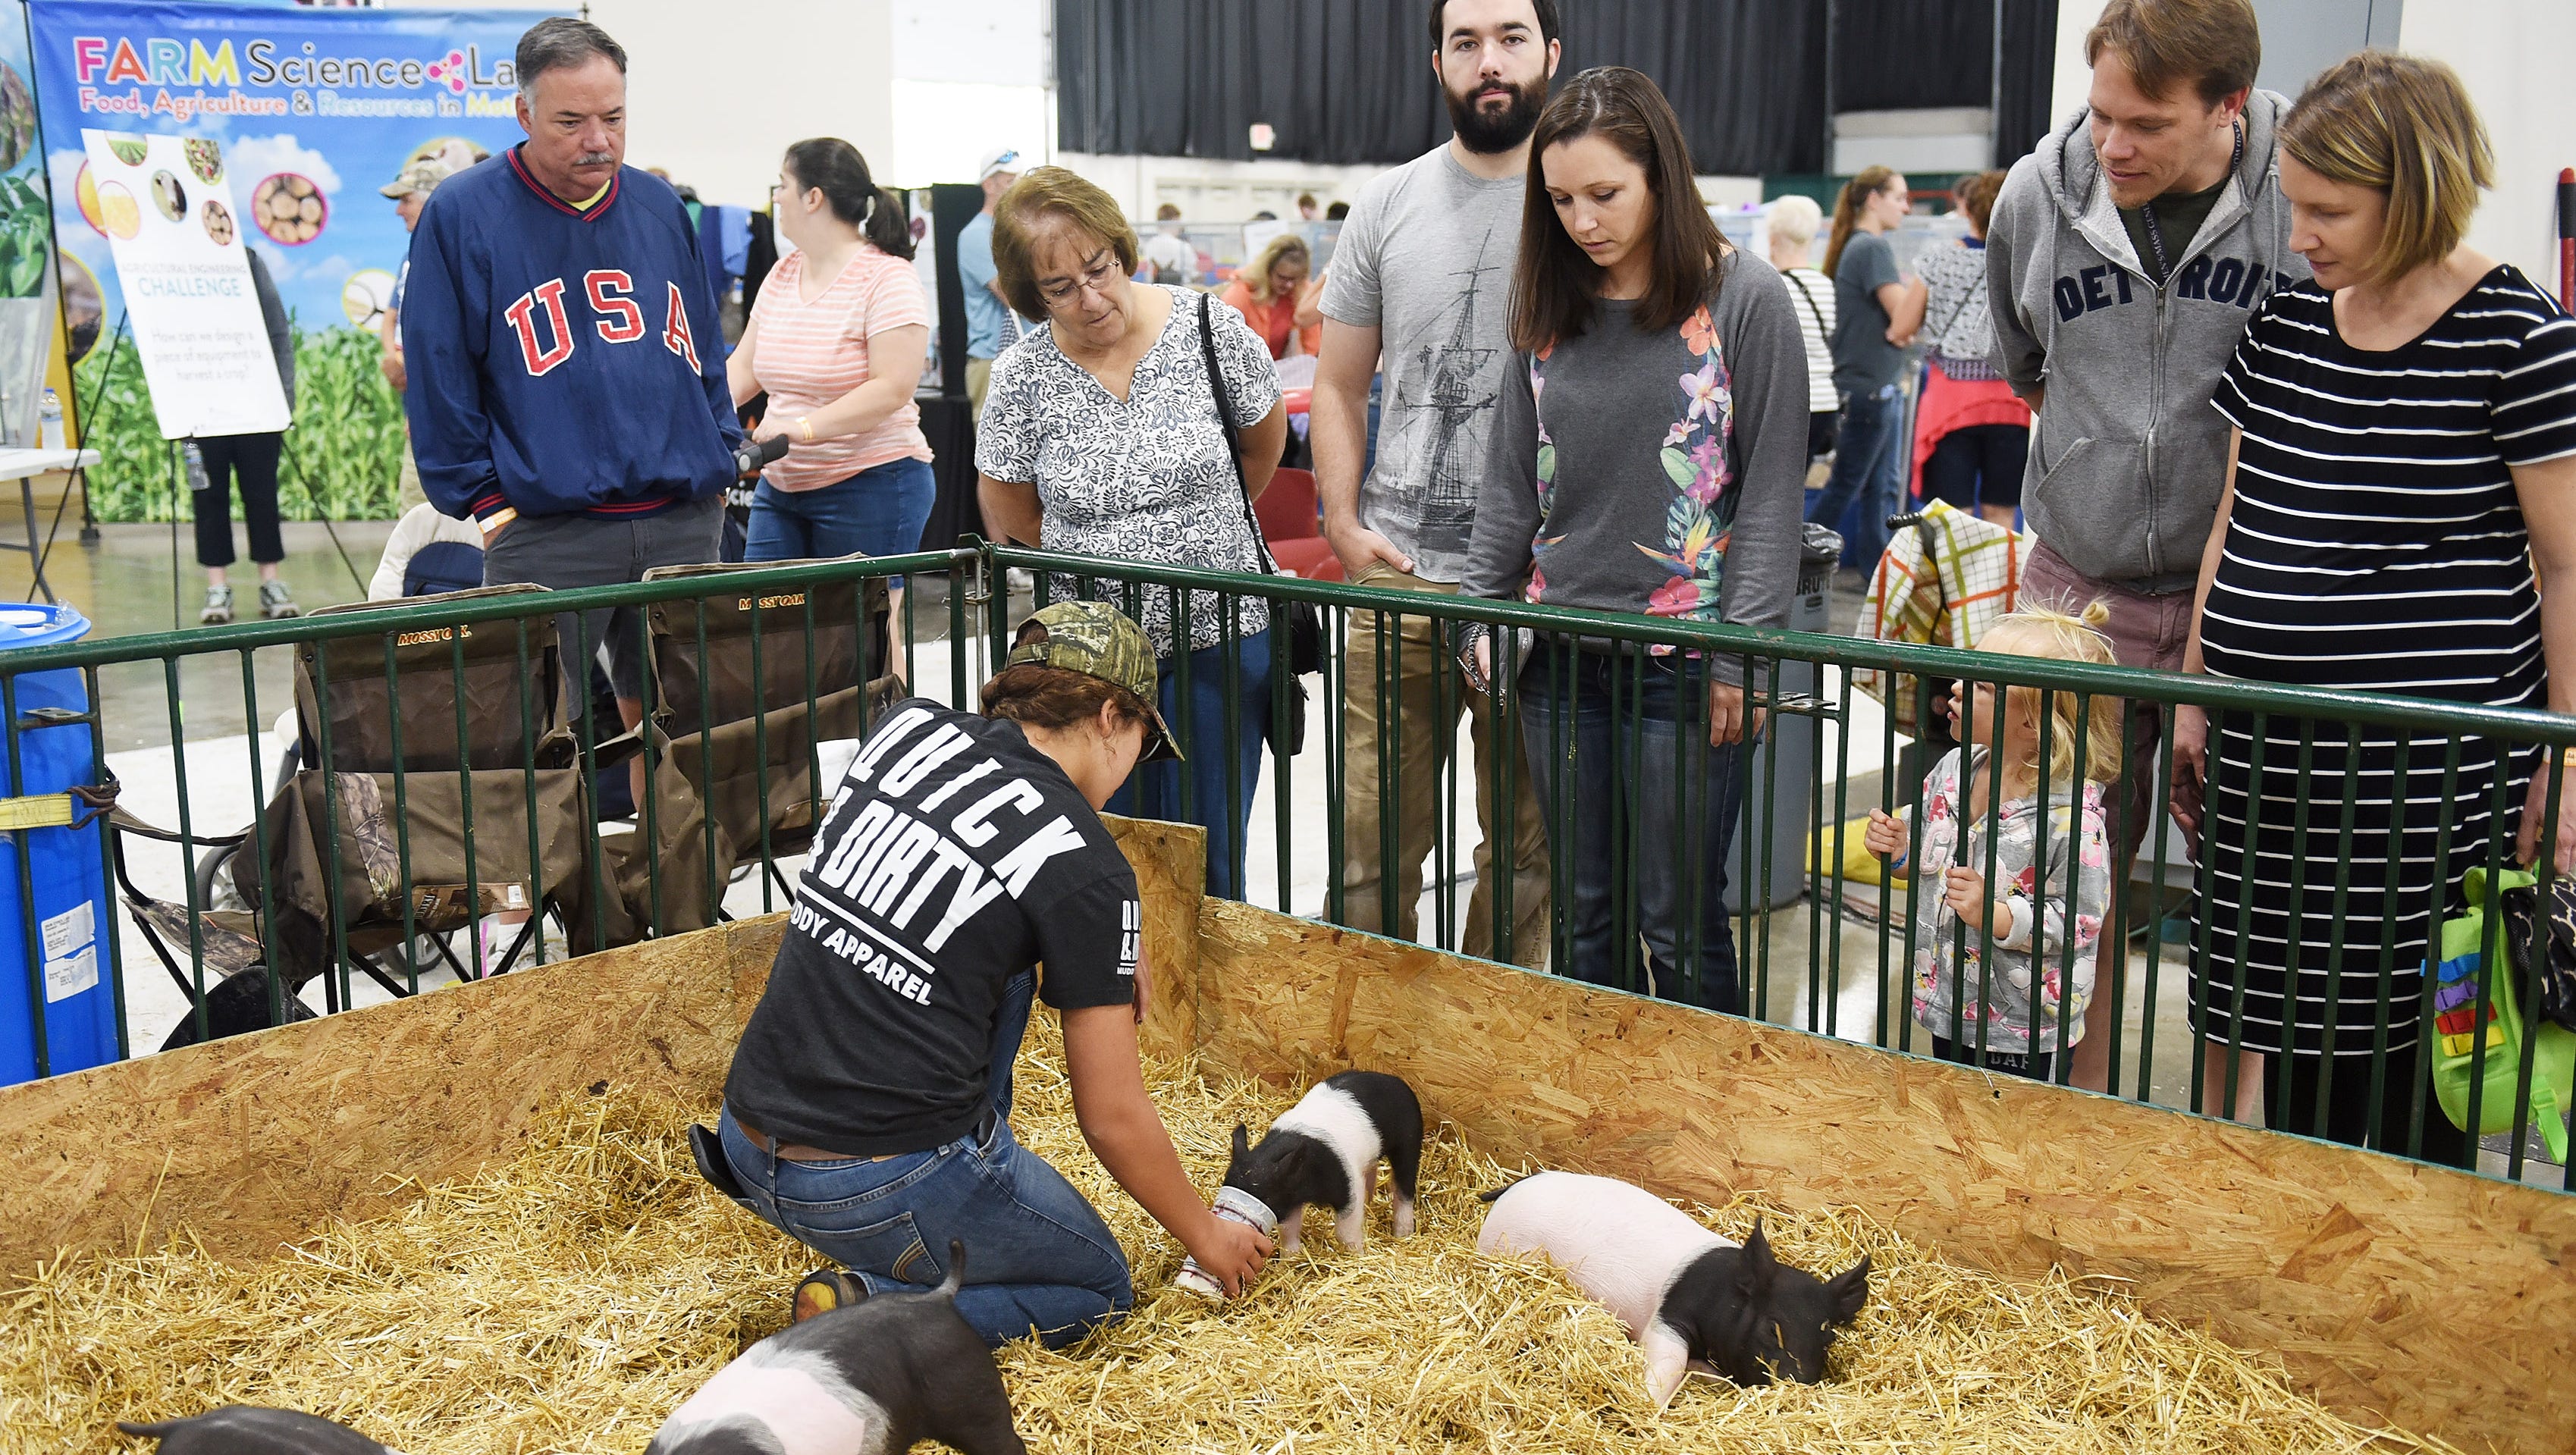 People watch as Baylee Huff, 15, of Durand feeds the runt of the litter, named Little Bit, at her display at the Michigan State Fair.